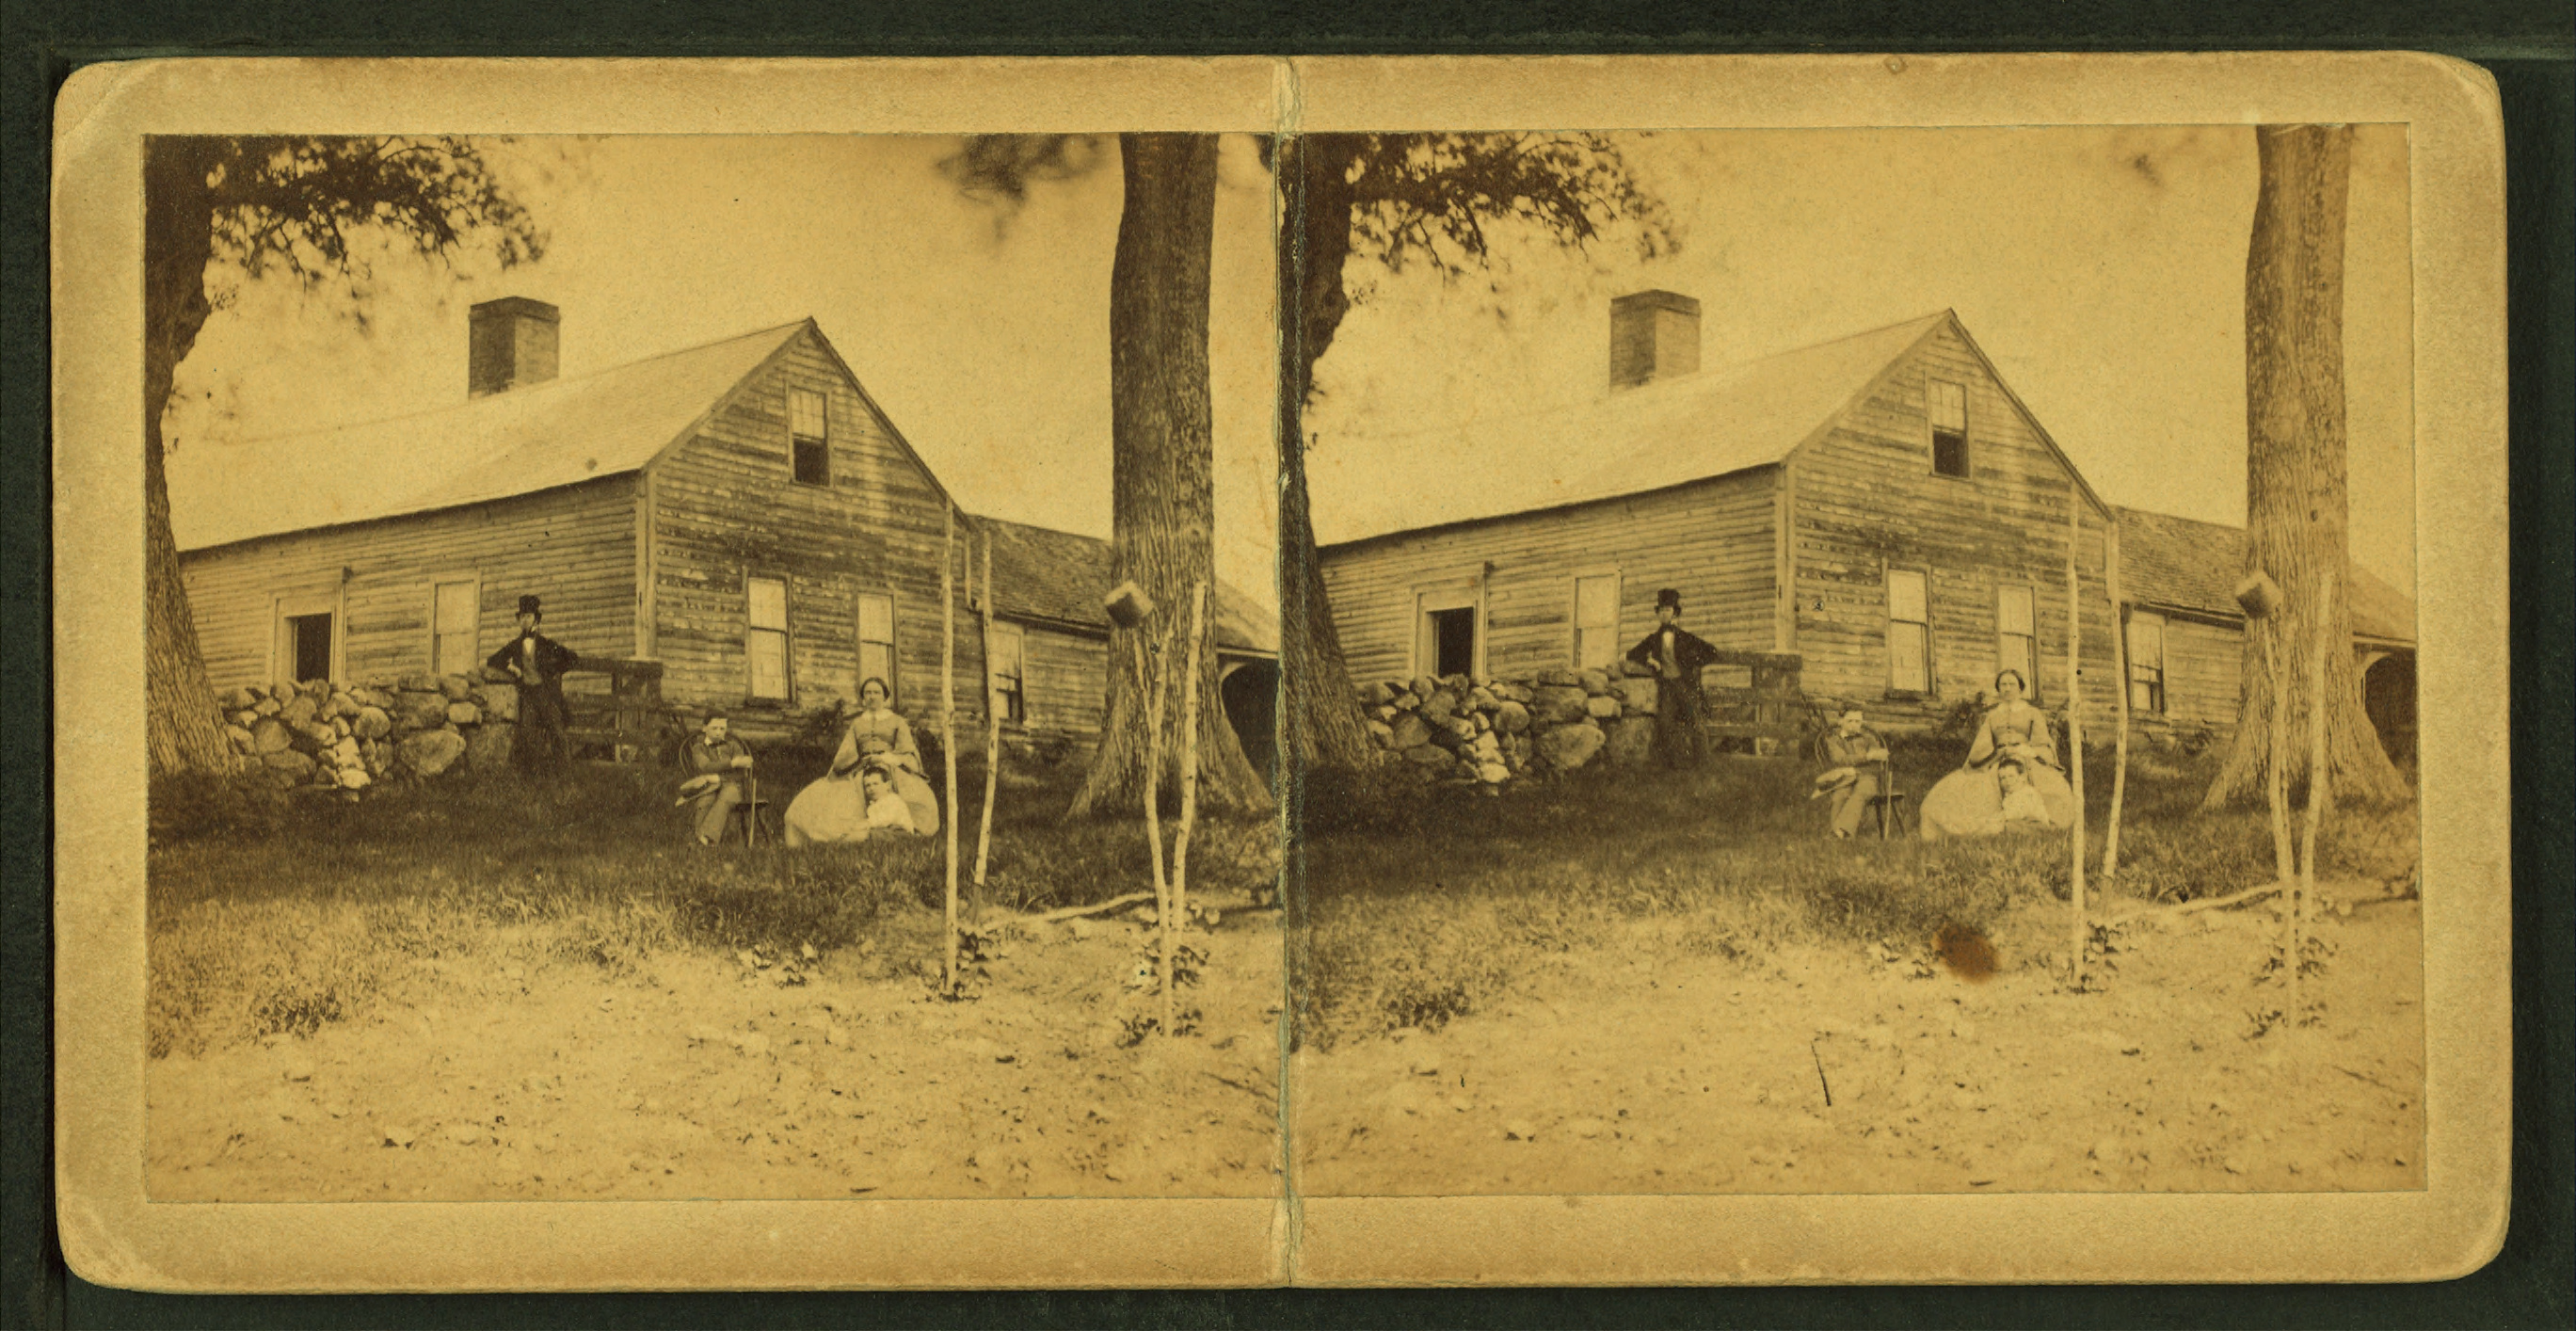 Family members posing against their block house with a stone fence, from Robert N. Dennis collection of stereoscopic views